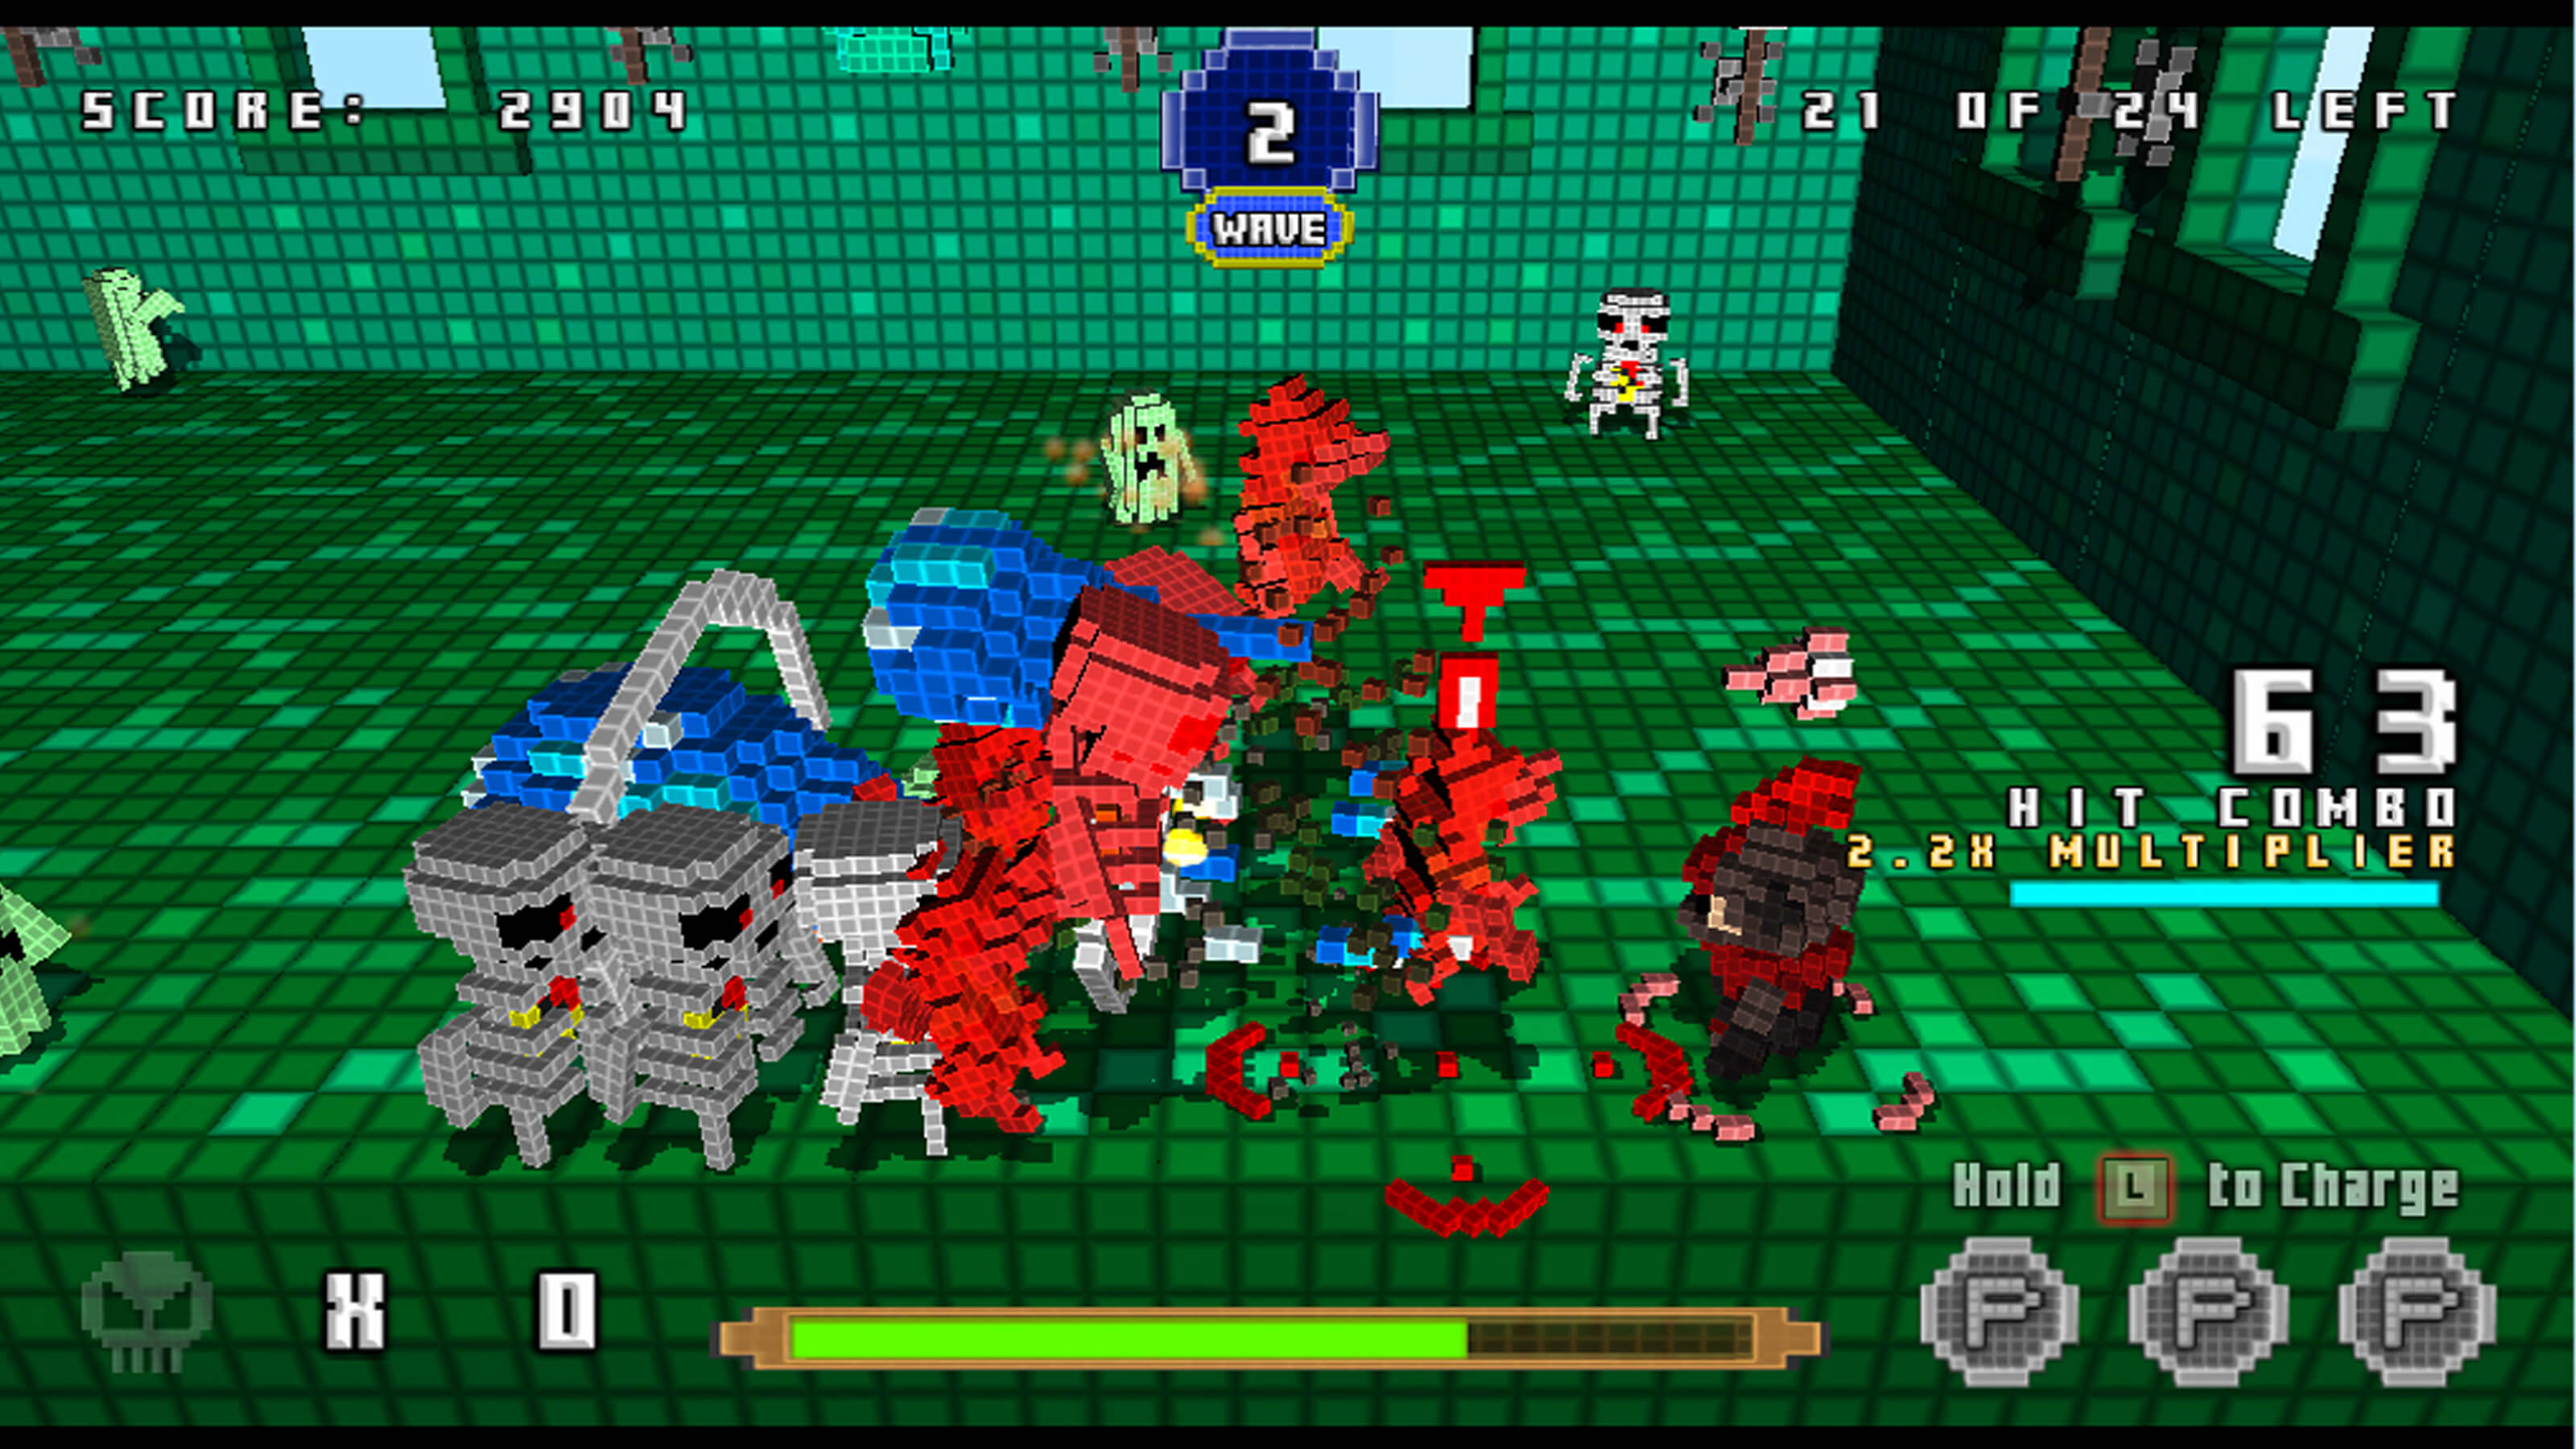 A crowd of multicolored, voxel-based enemies descend on the player on a green-background map